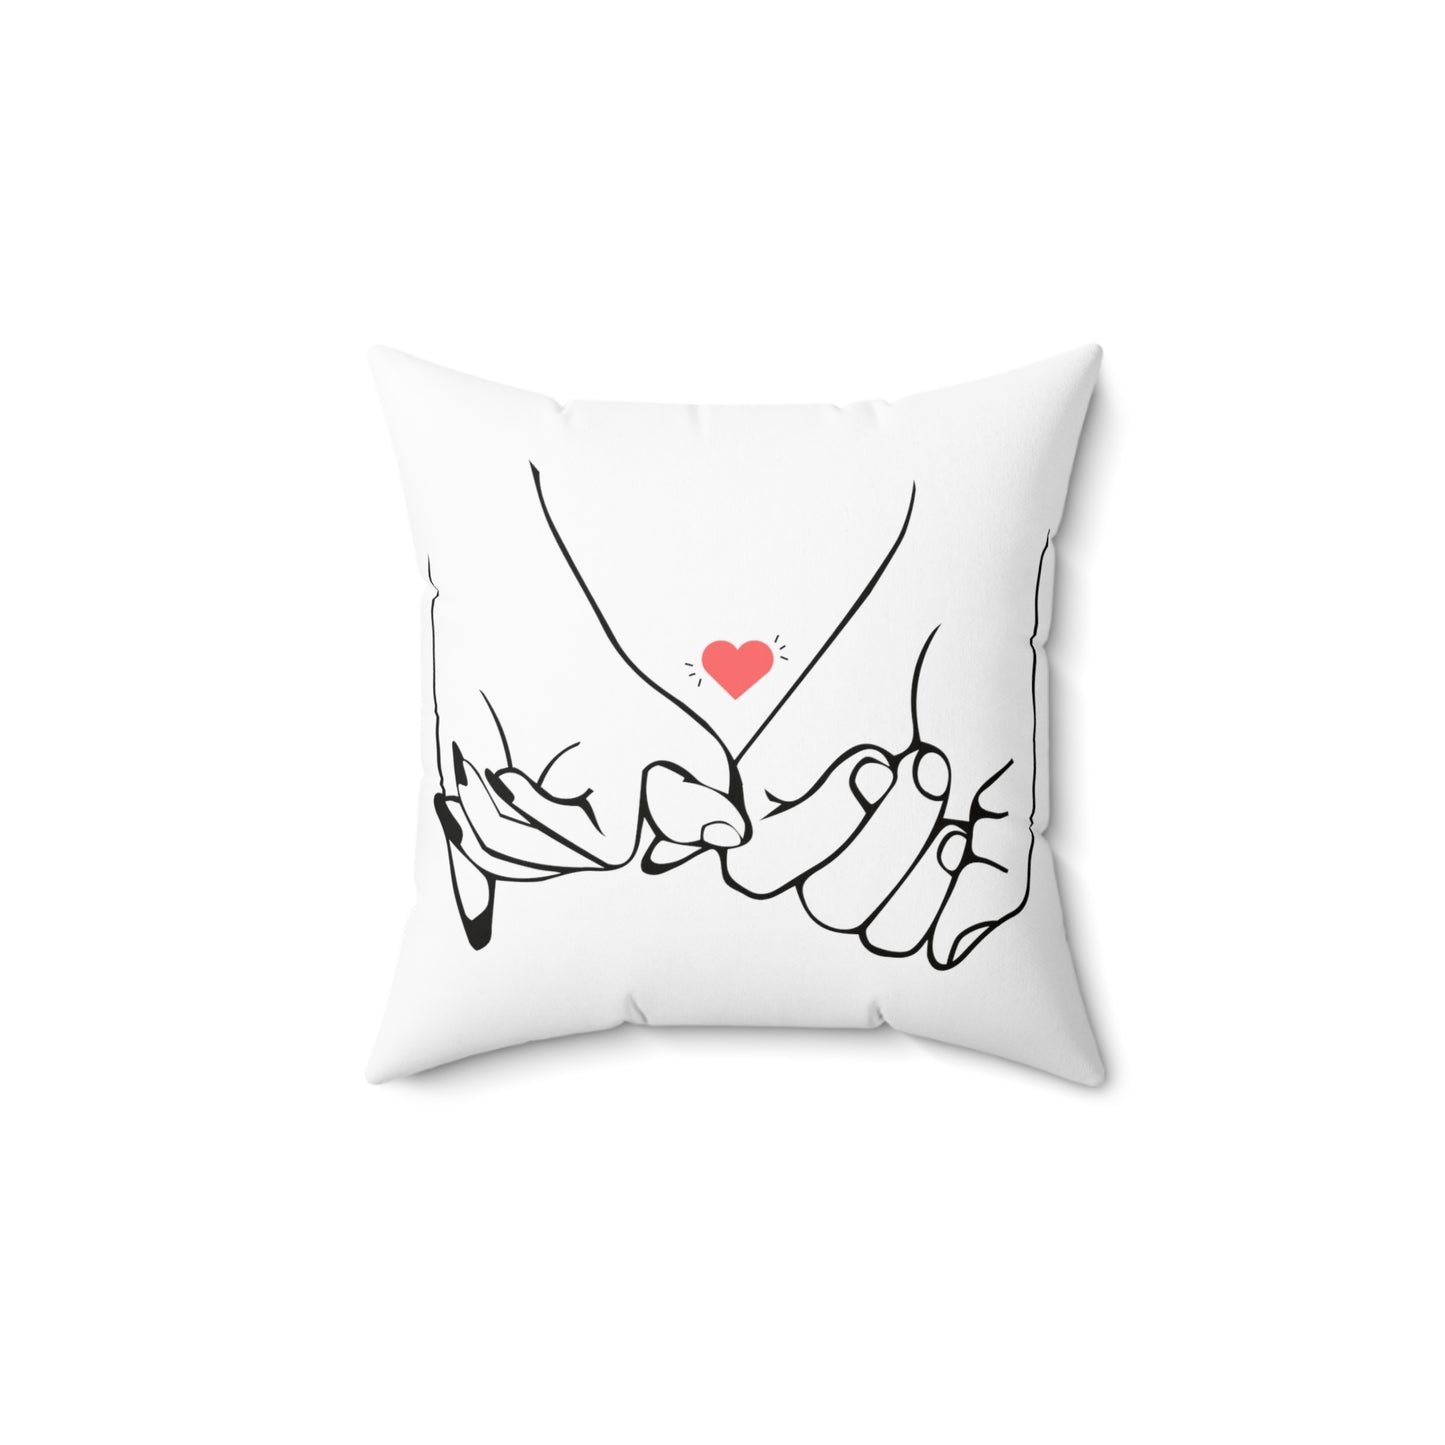 Love You with Couples Hand Printed Square Pillow